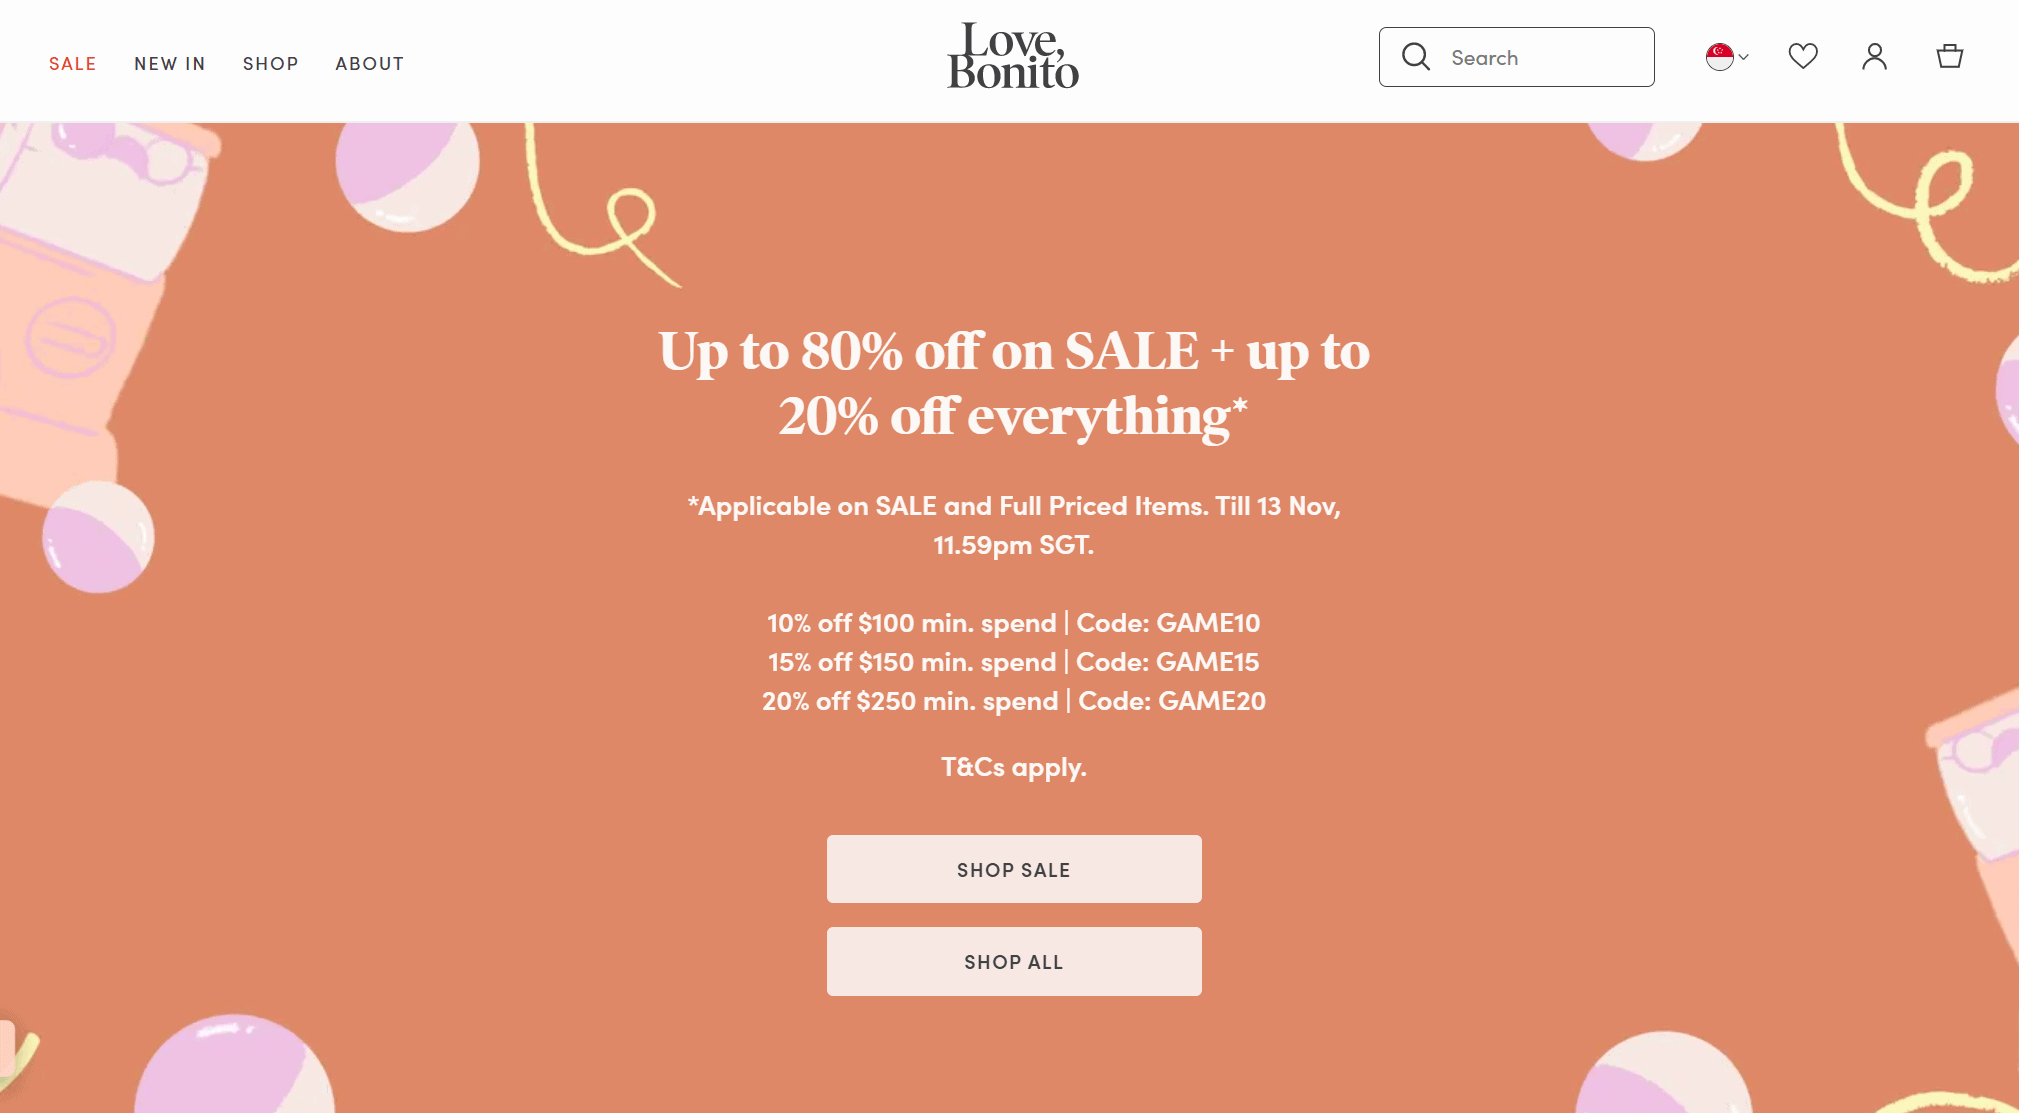 Love, Bonito | Single's Day 2022 | Up to 80% off sale